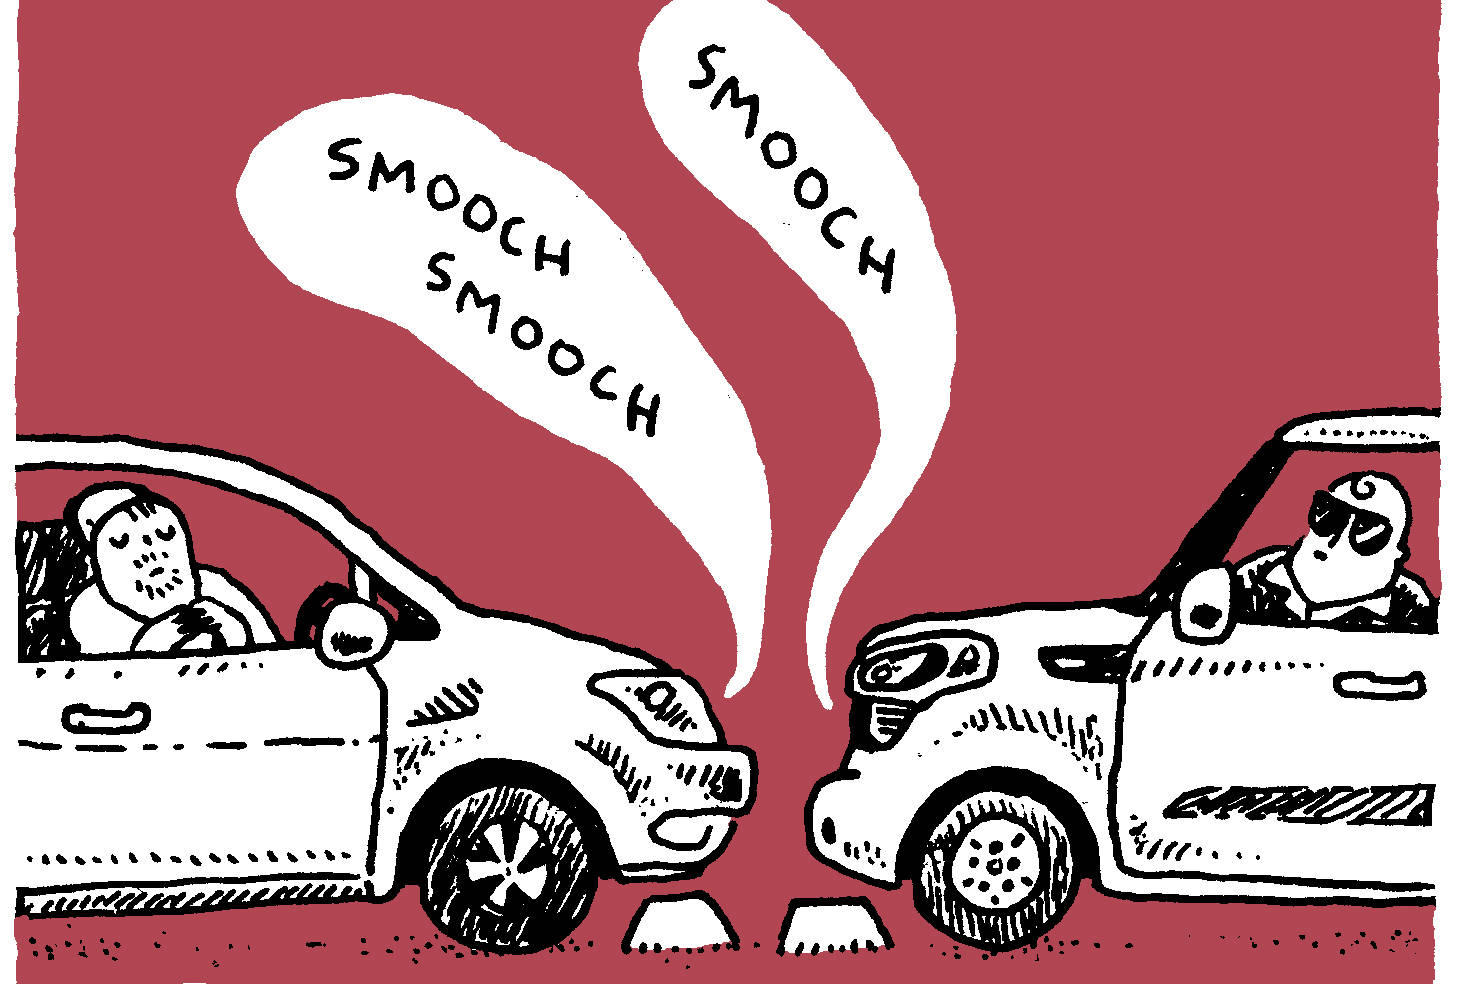 BAD BOY COMIX: Boys in Parked Cars